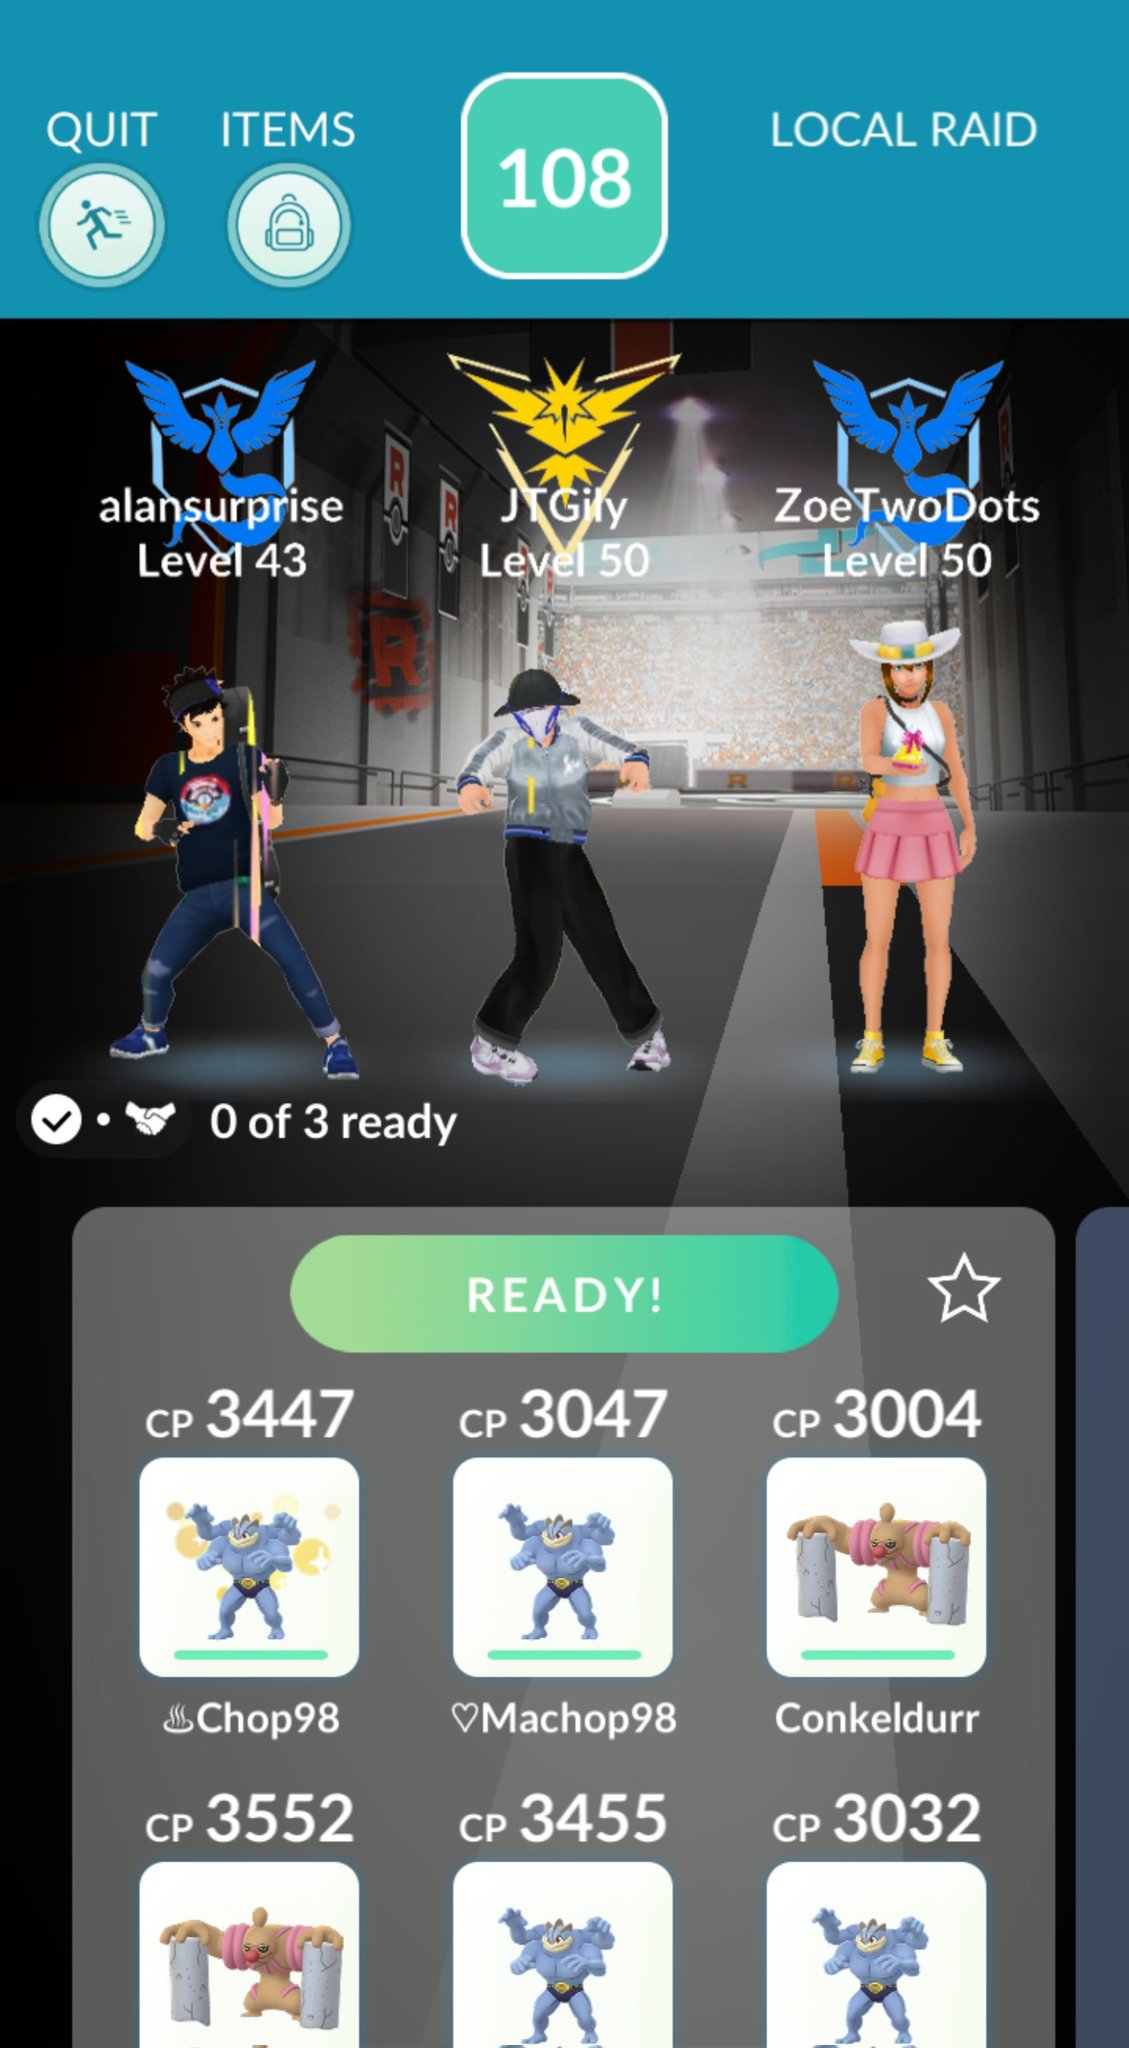 ZoëTwoDots 🎀 on X: "Ready up button is live in #PokemonGO!? Do you have this feature in your area? Tested with local raid and also with inviting remote raiders (both worked). https://t.co/9CbBNJsCgL" /